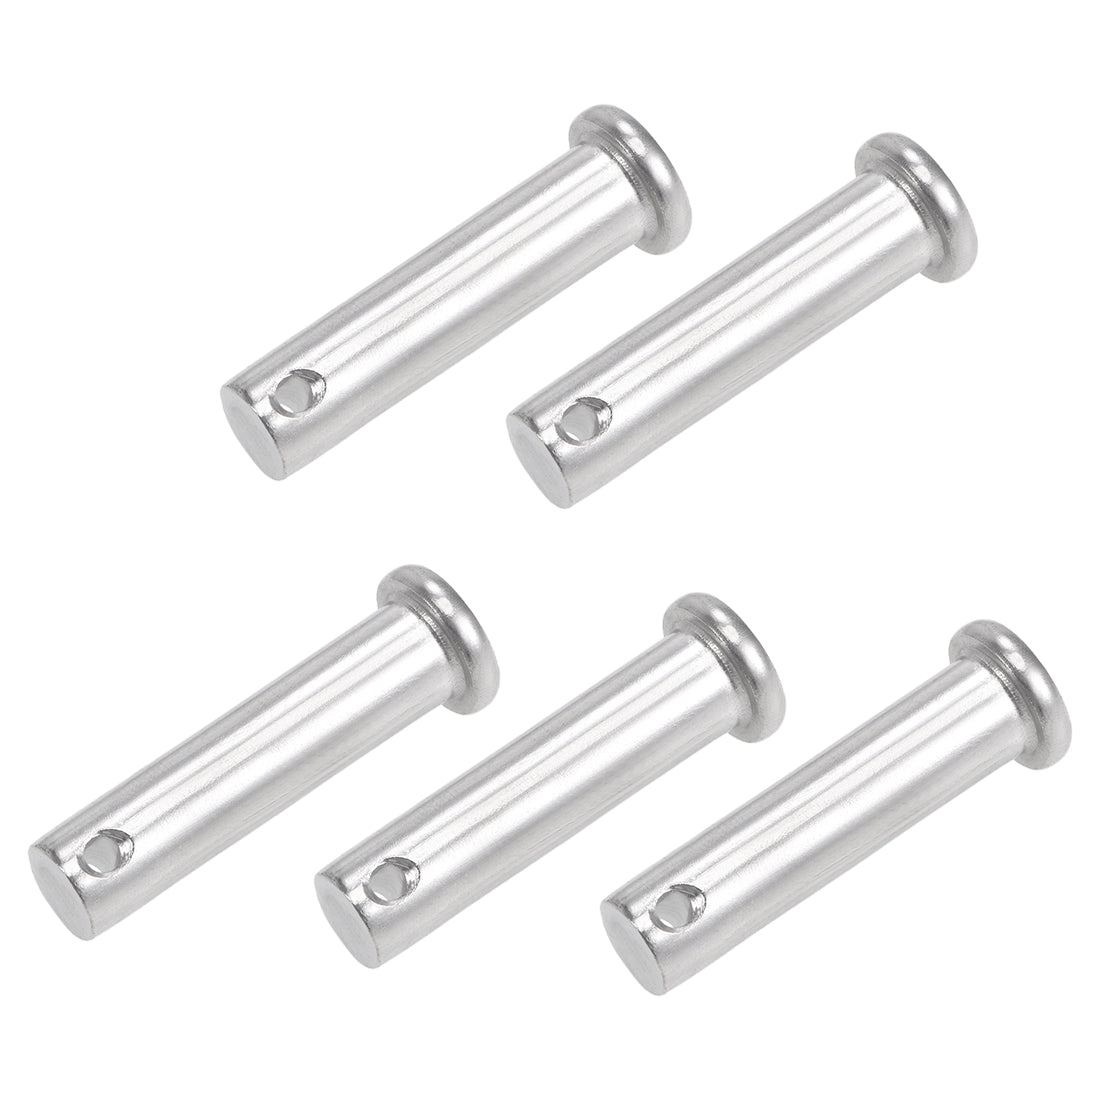 Uxcell Uxcell Single Hole Clevis Pins - 10mm x 50mm Flat Head 304 Stainless Steel Link Hinge Pin 5Pcs